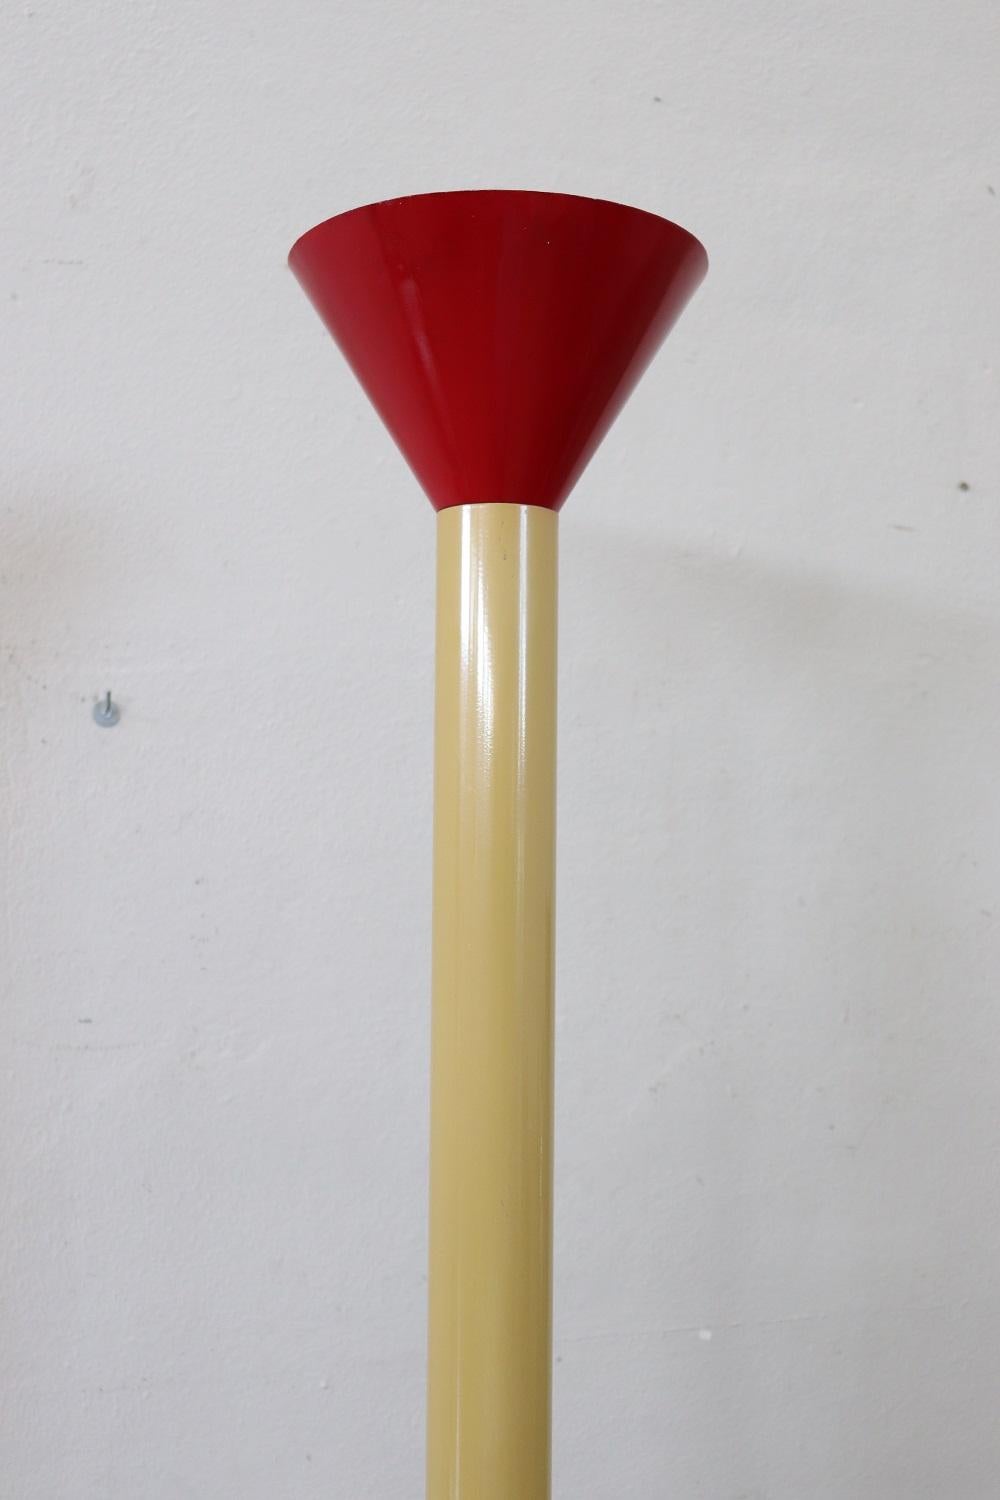 Late 20th Century Modern Colored Steel Callimaco Floor Lamp by Sottsass for Artemide 1980s For Sale